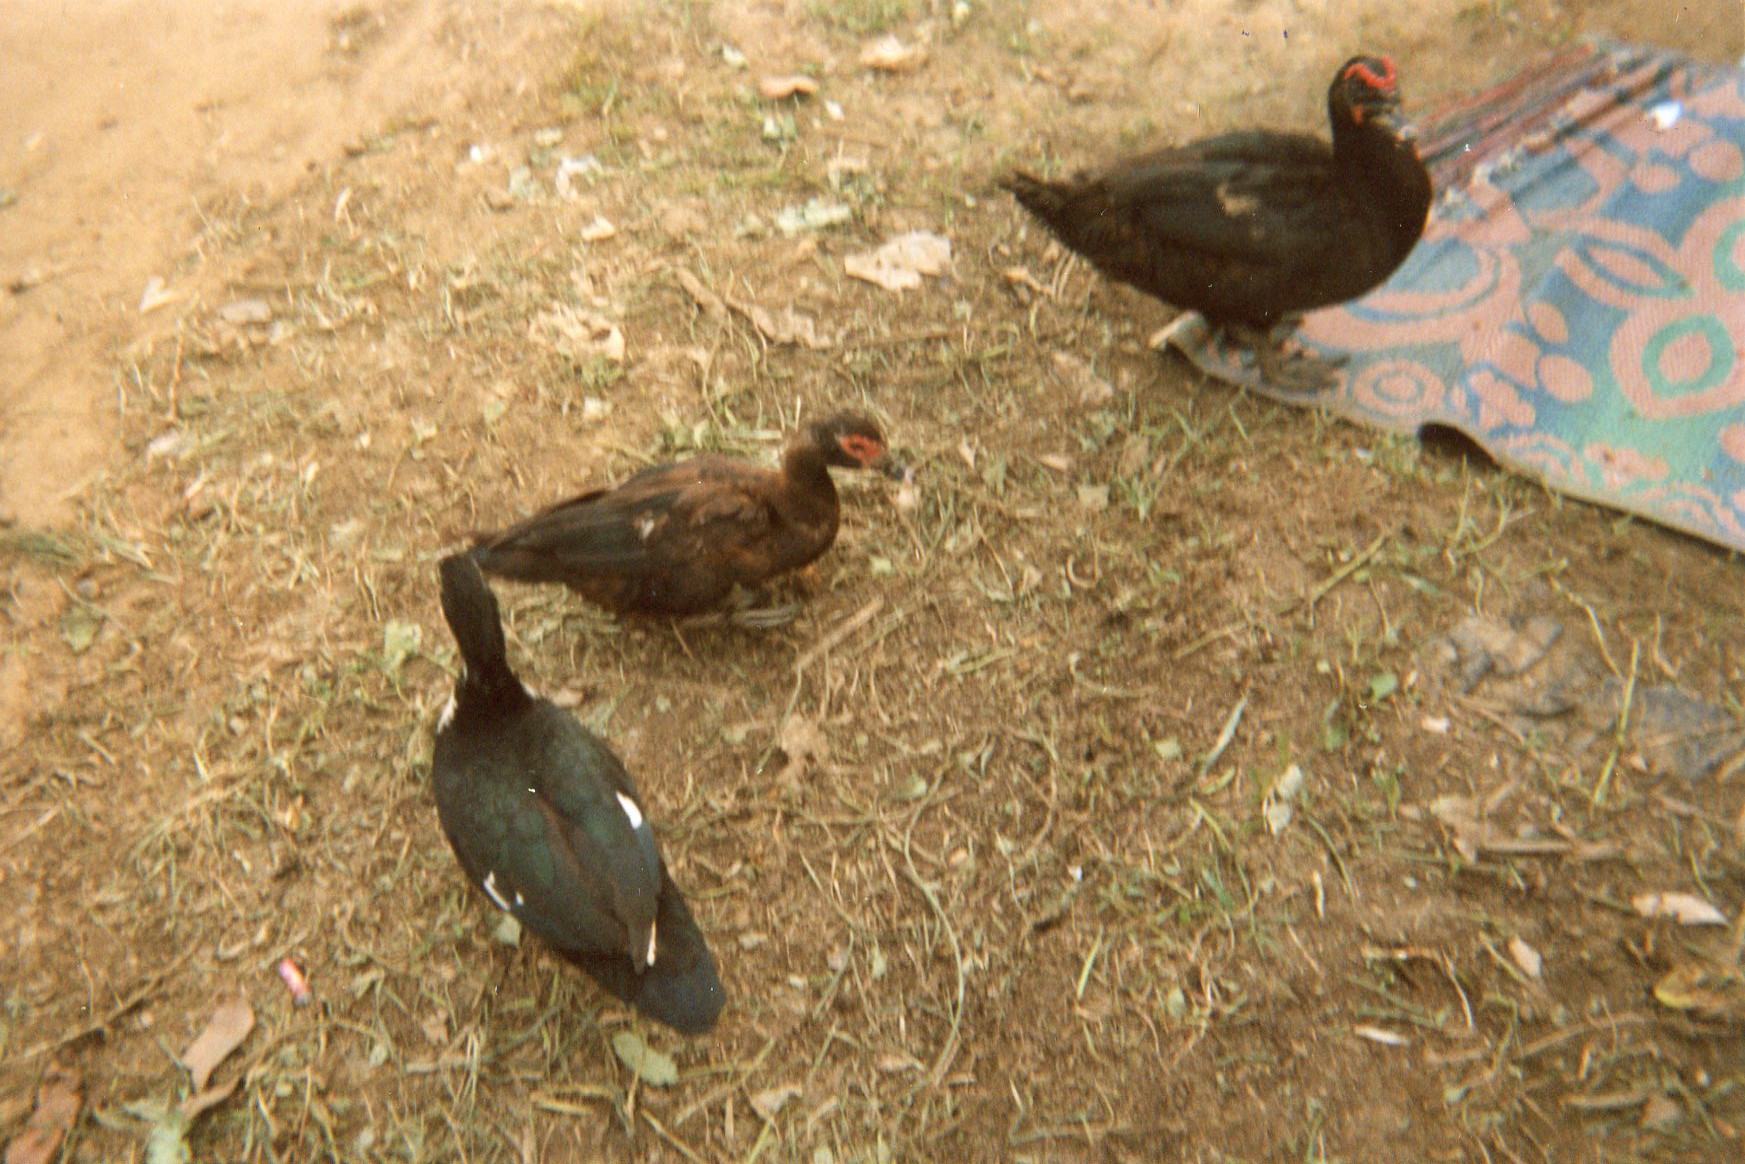  Here I left to go steal these ducks in Mgini.  